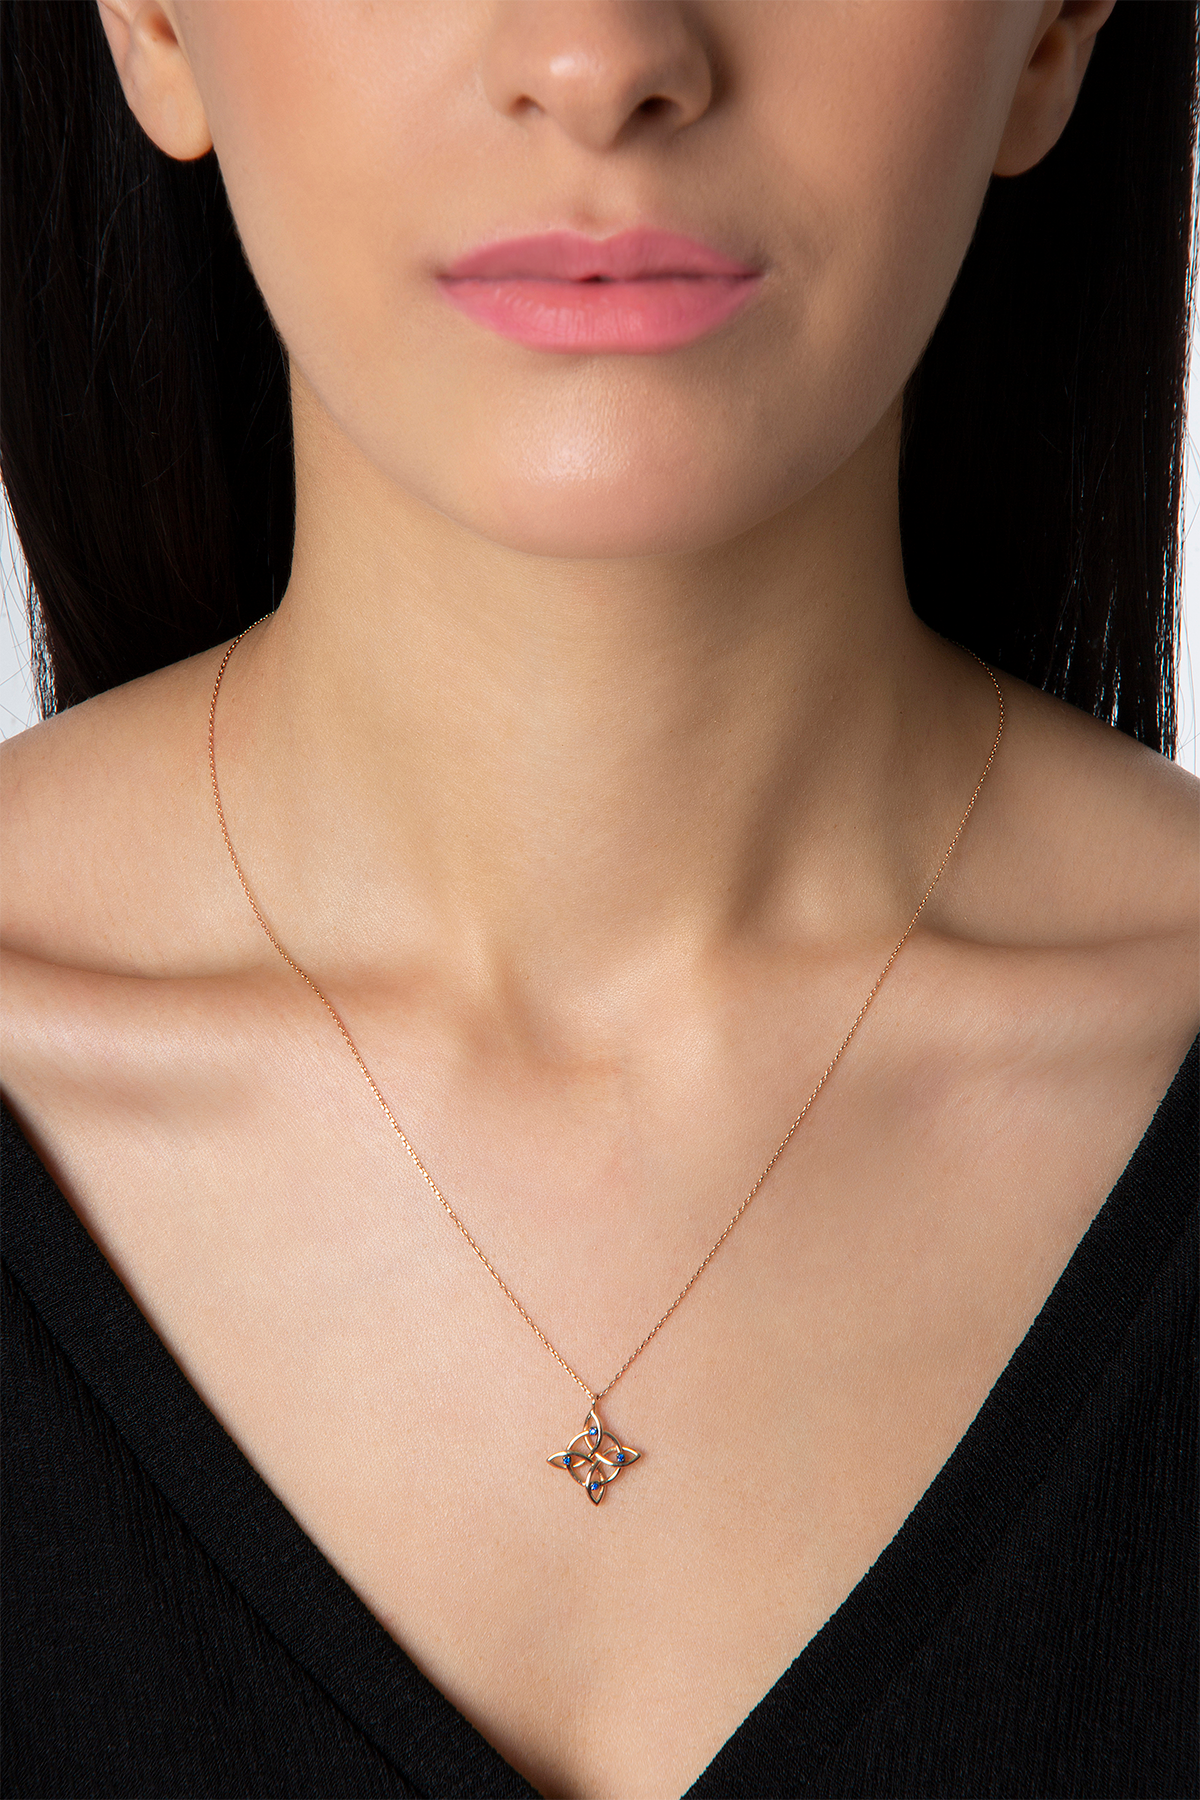 Pure Magic Knot Necklace in Rose Gold - Her Story Shop